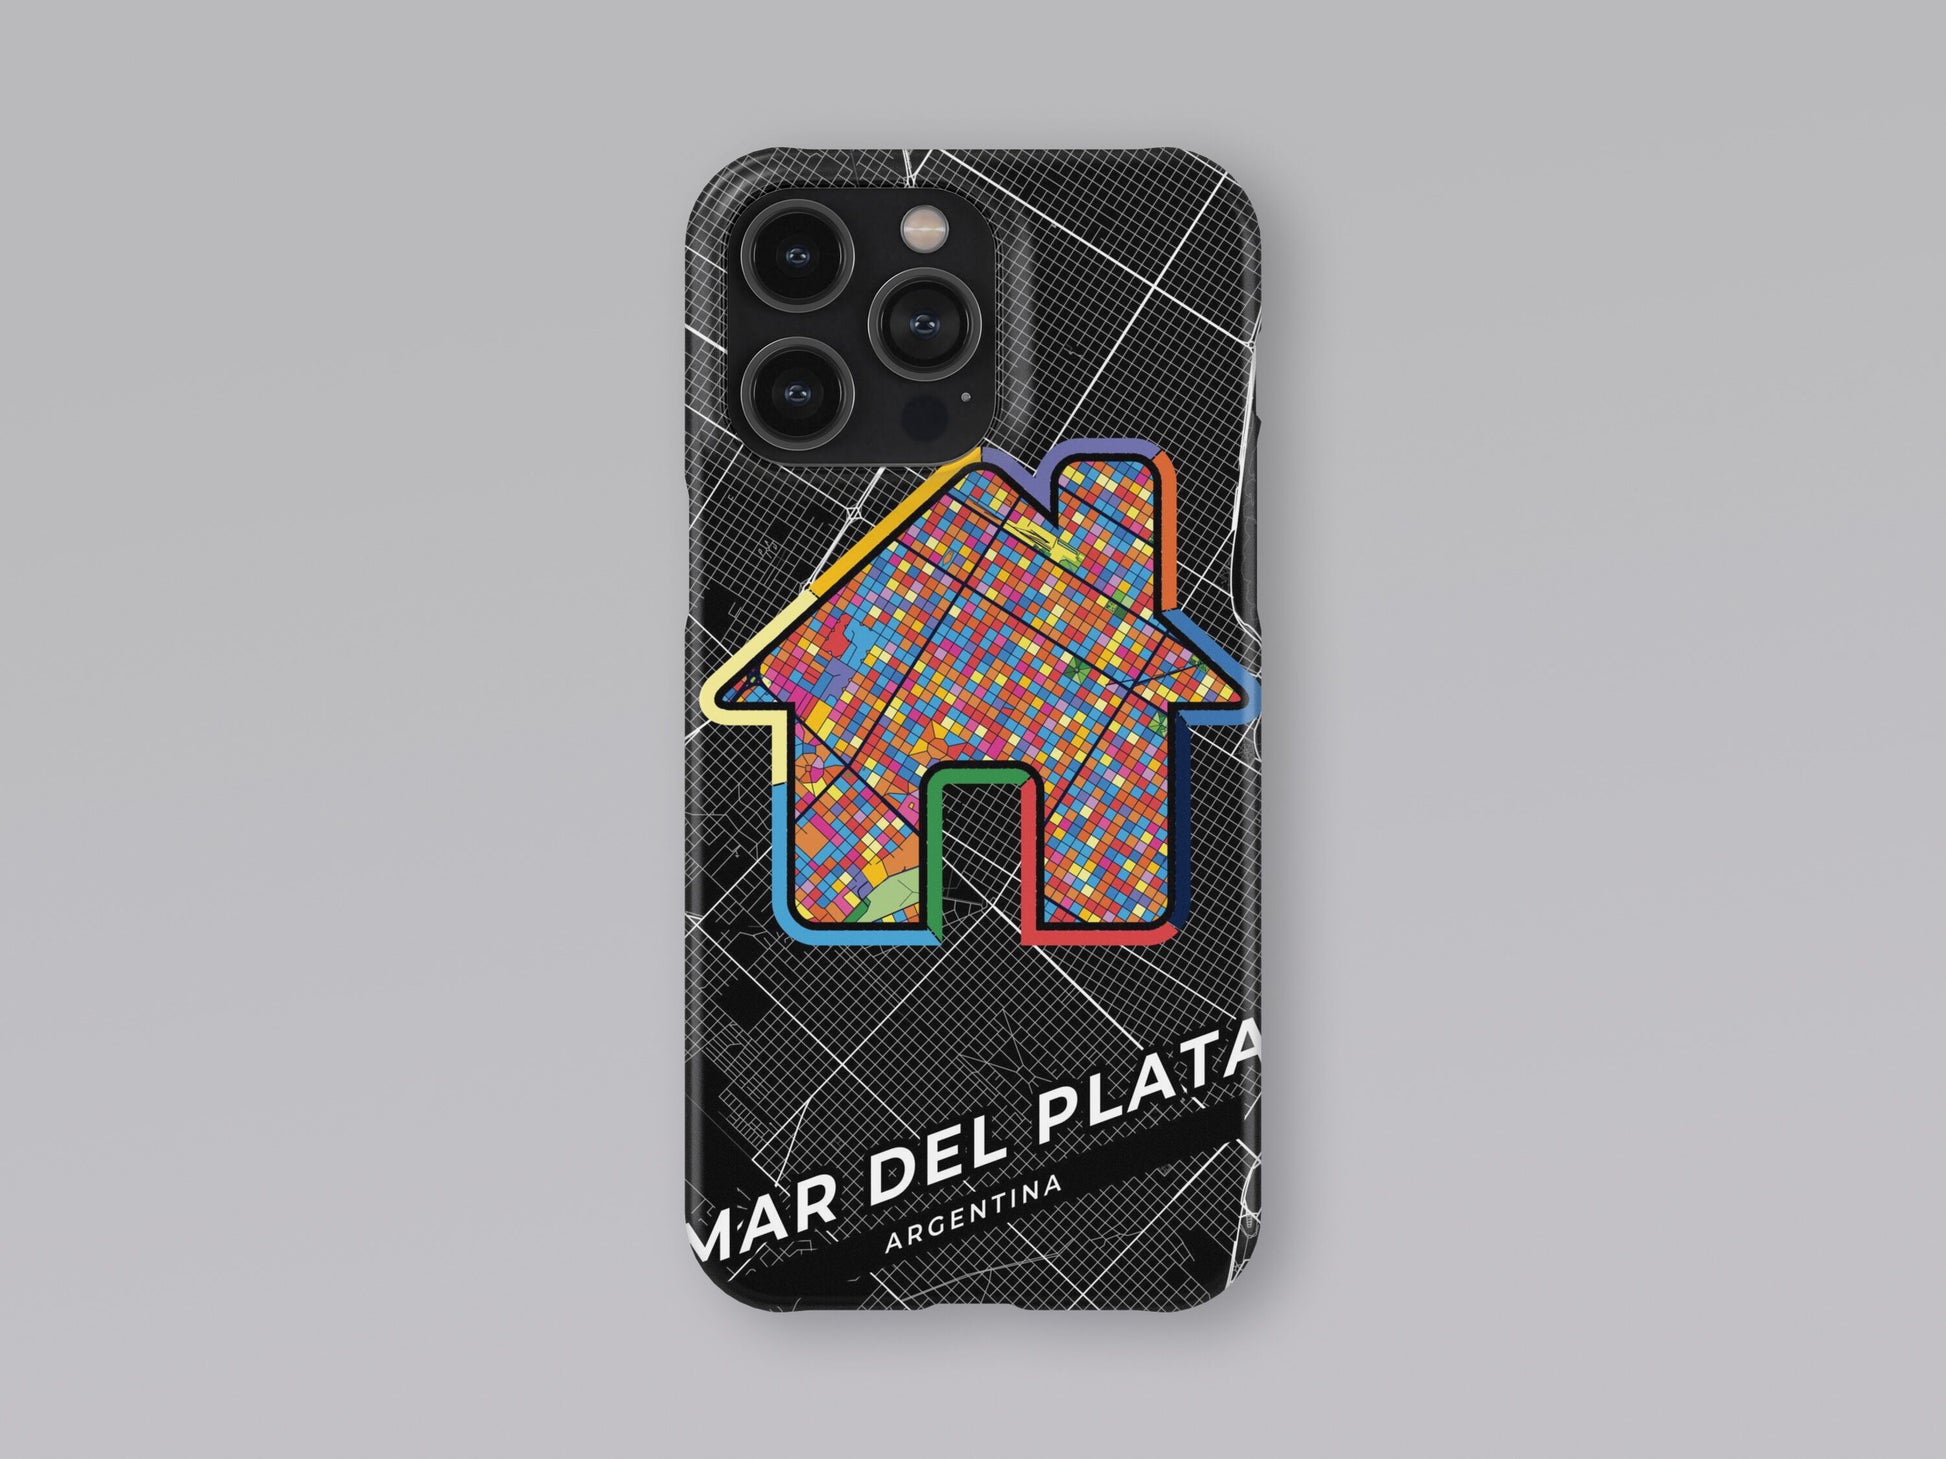 Mar Del Plata Argentina slim phone case with colorful icon. Birthday, wedding or housewarming gift. Couple match cases. 3